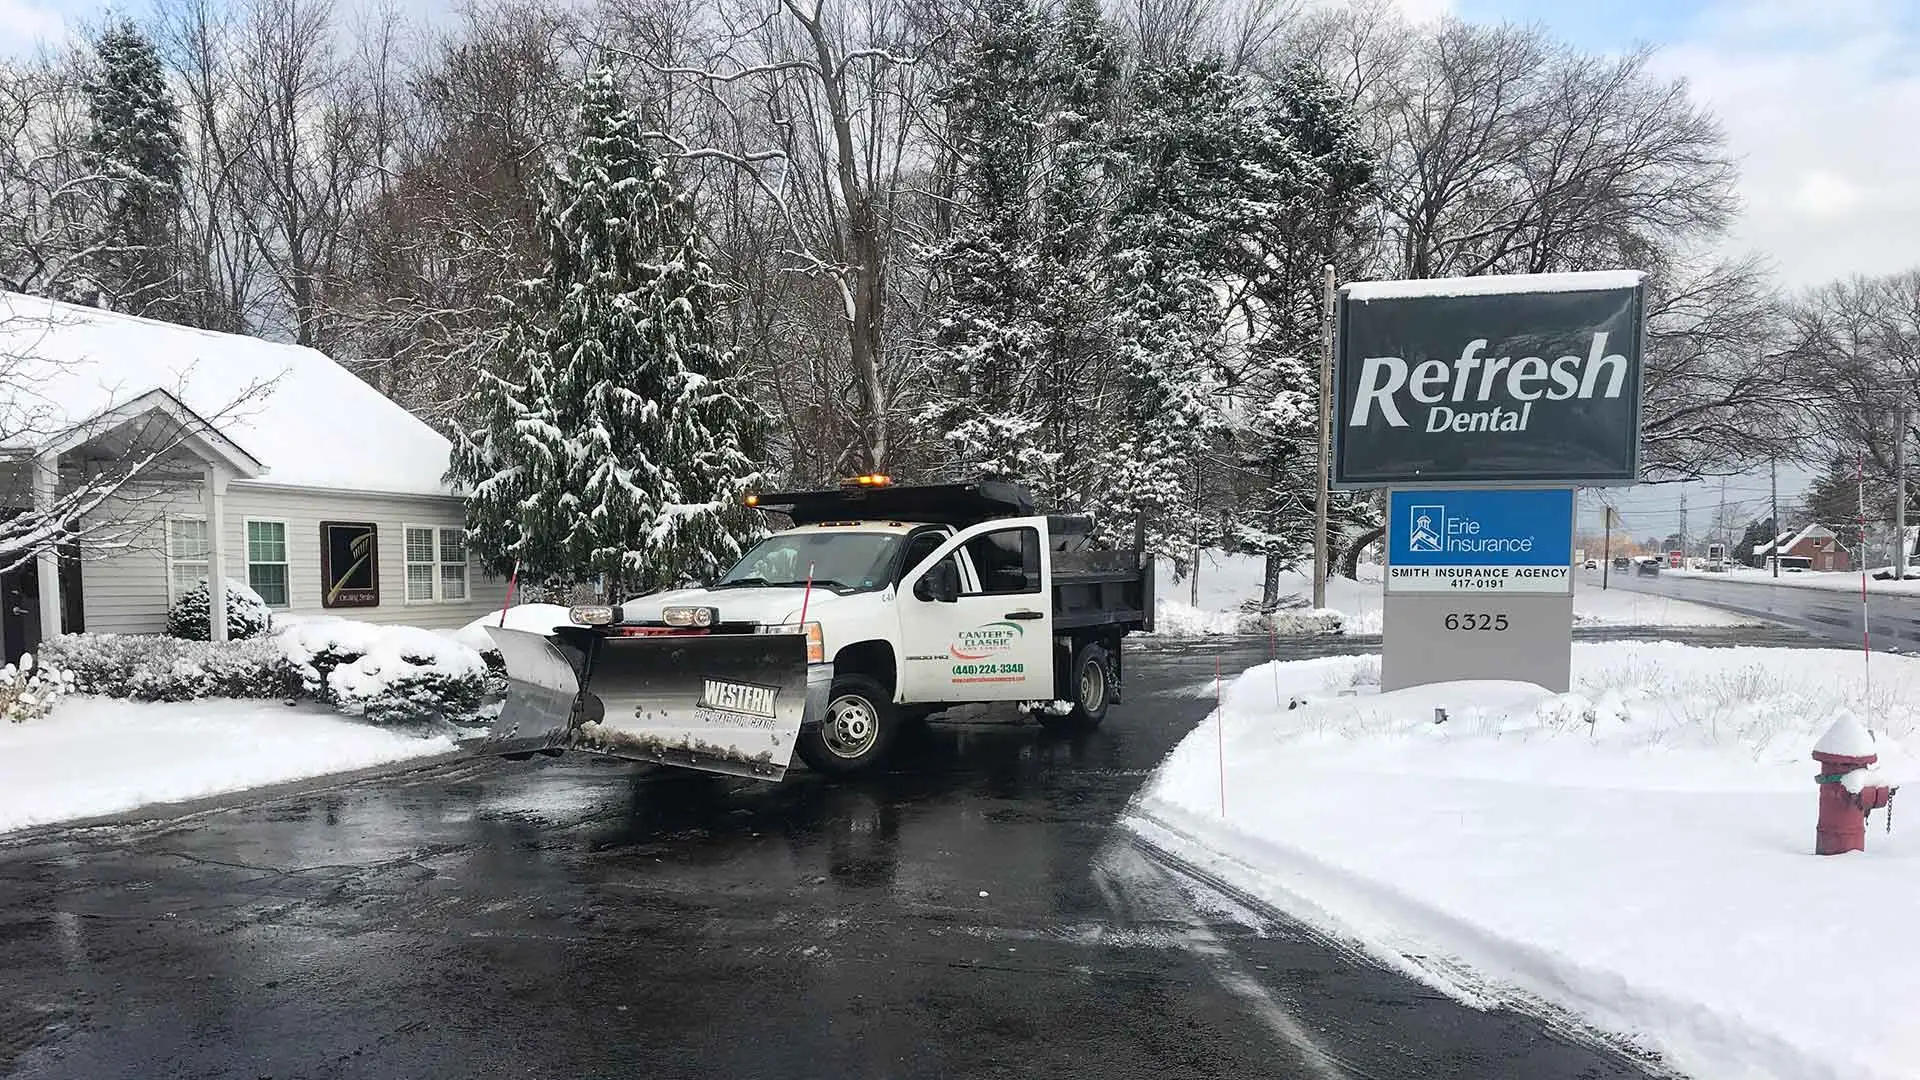 Our teams perform snow removal and deicing for residential and commercial clients.